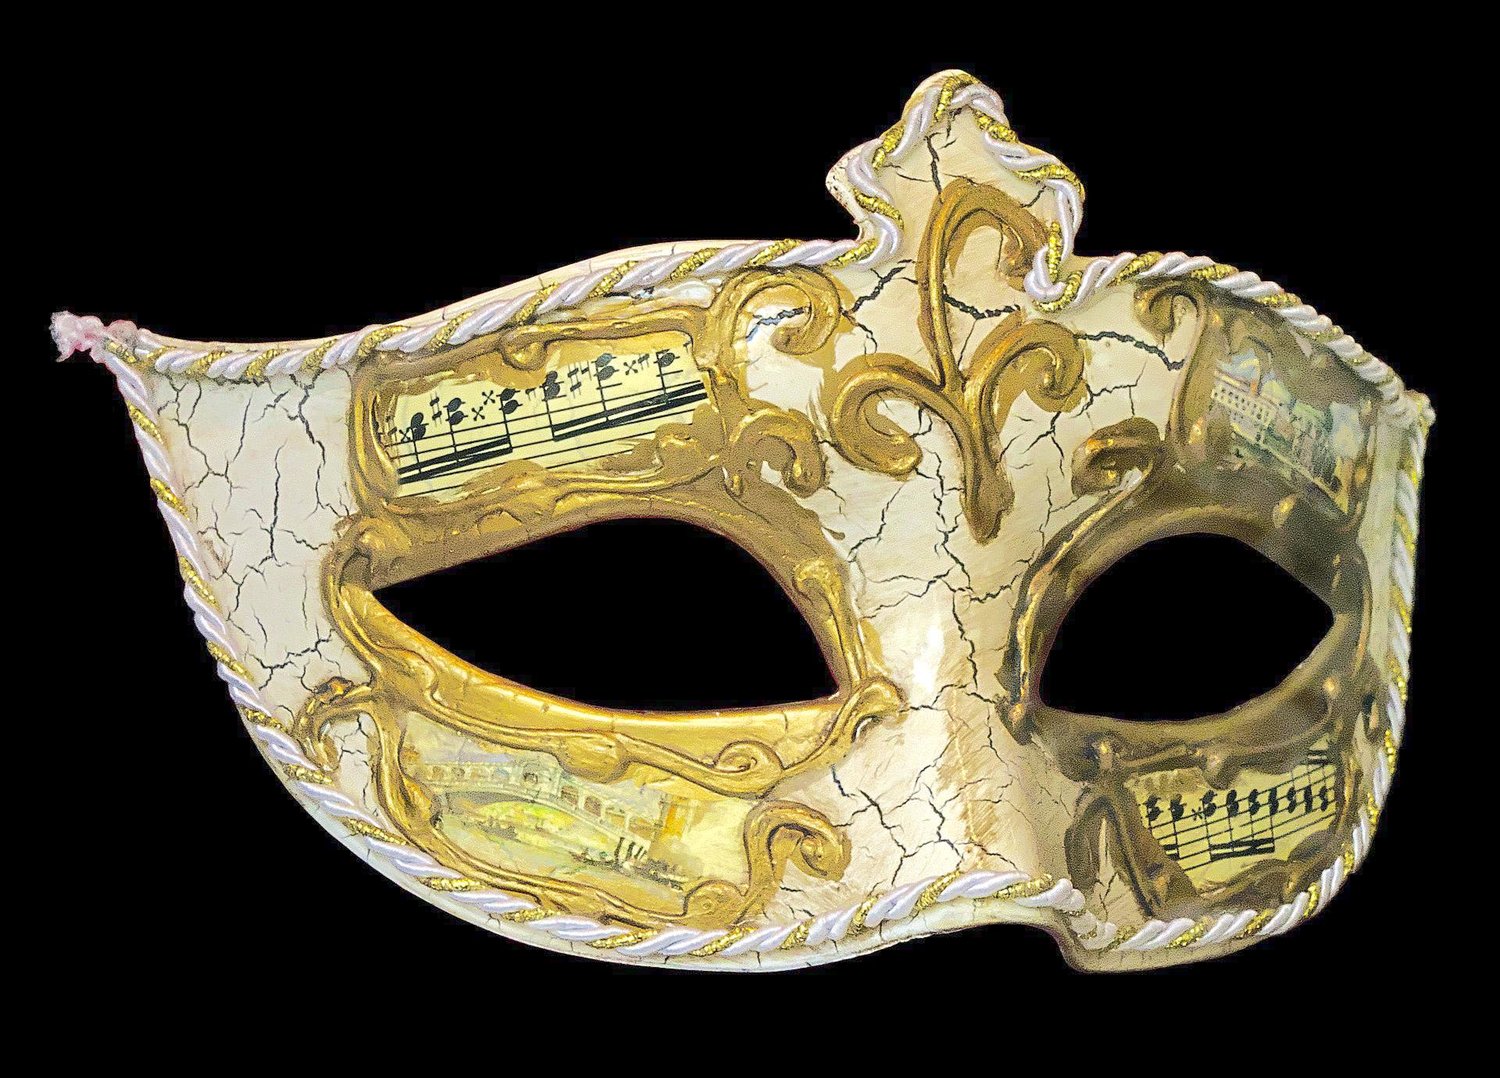 This year’s Gala Di Mistero Masquerade Ball will take place Saturday at Teugega Country Club.